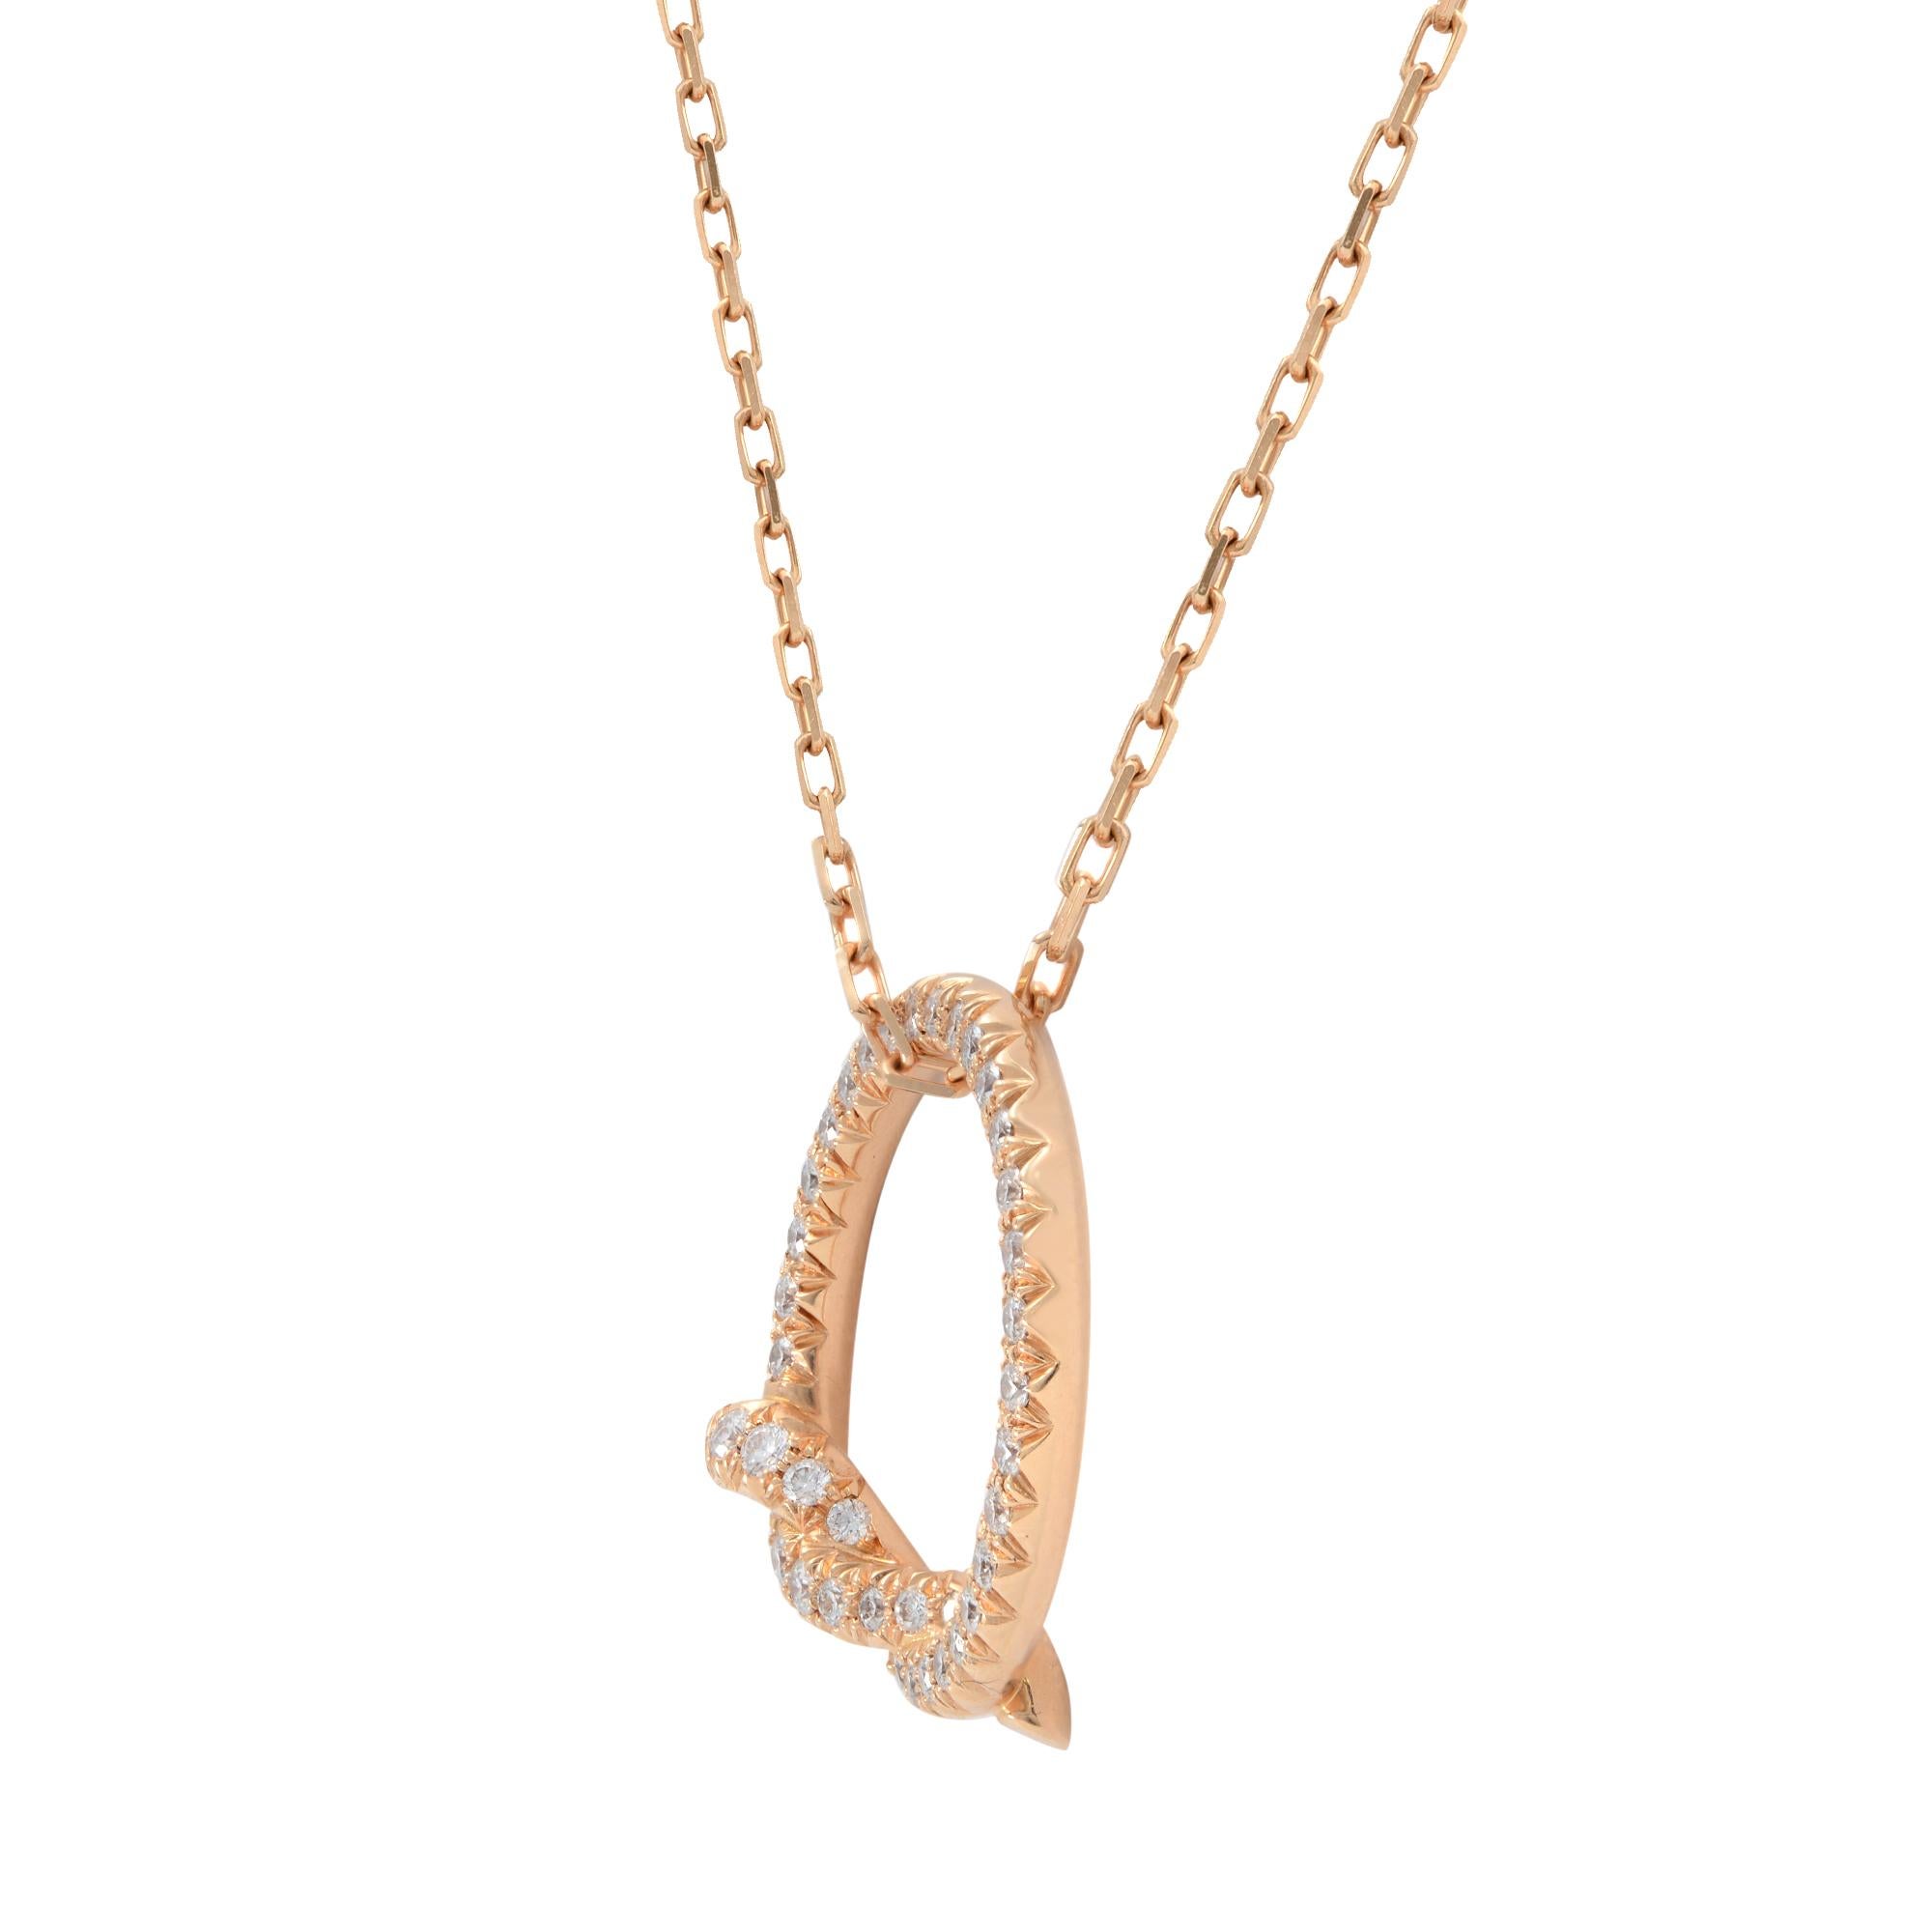 Cartier Entrelaces round diamond knot pendant necklace crafted in 18K rose gold. Total diamond weight: 0.28ct. Chain length: 16 inches. The necklace is in excellent preowned condition. Comes with a box. Papers are not included. 